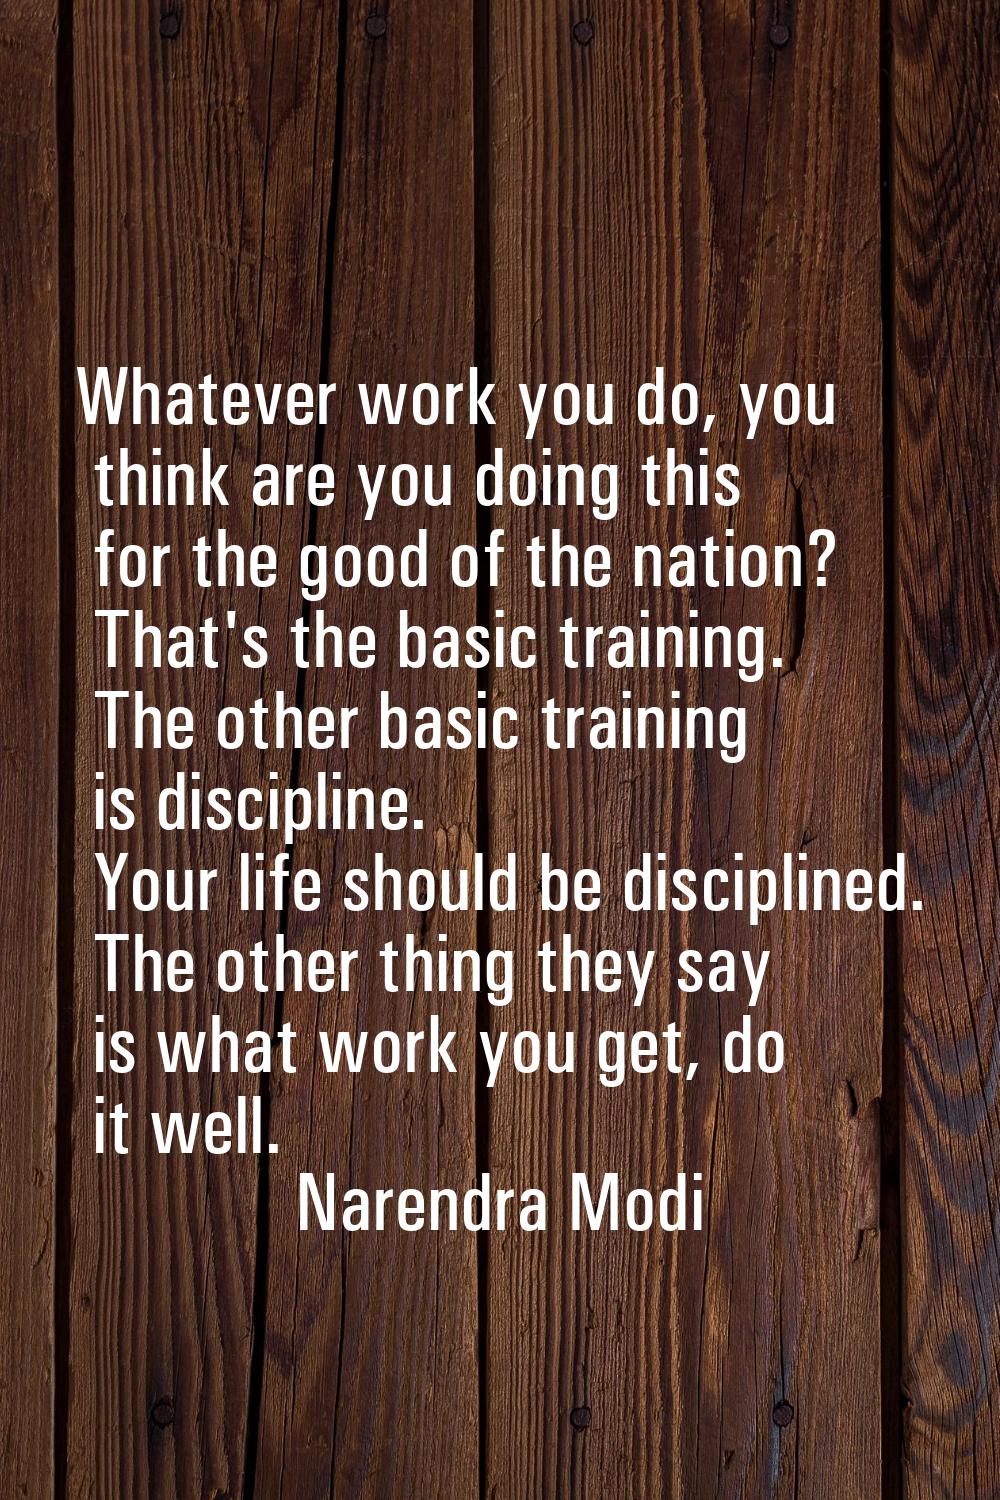 Whatever work you do, you think are you doing this for the good of the nation? That's the basic tra